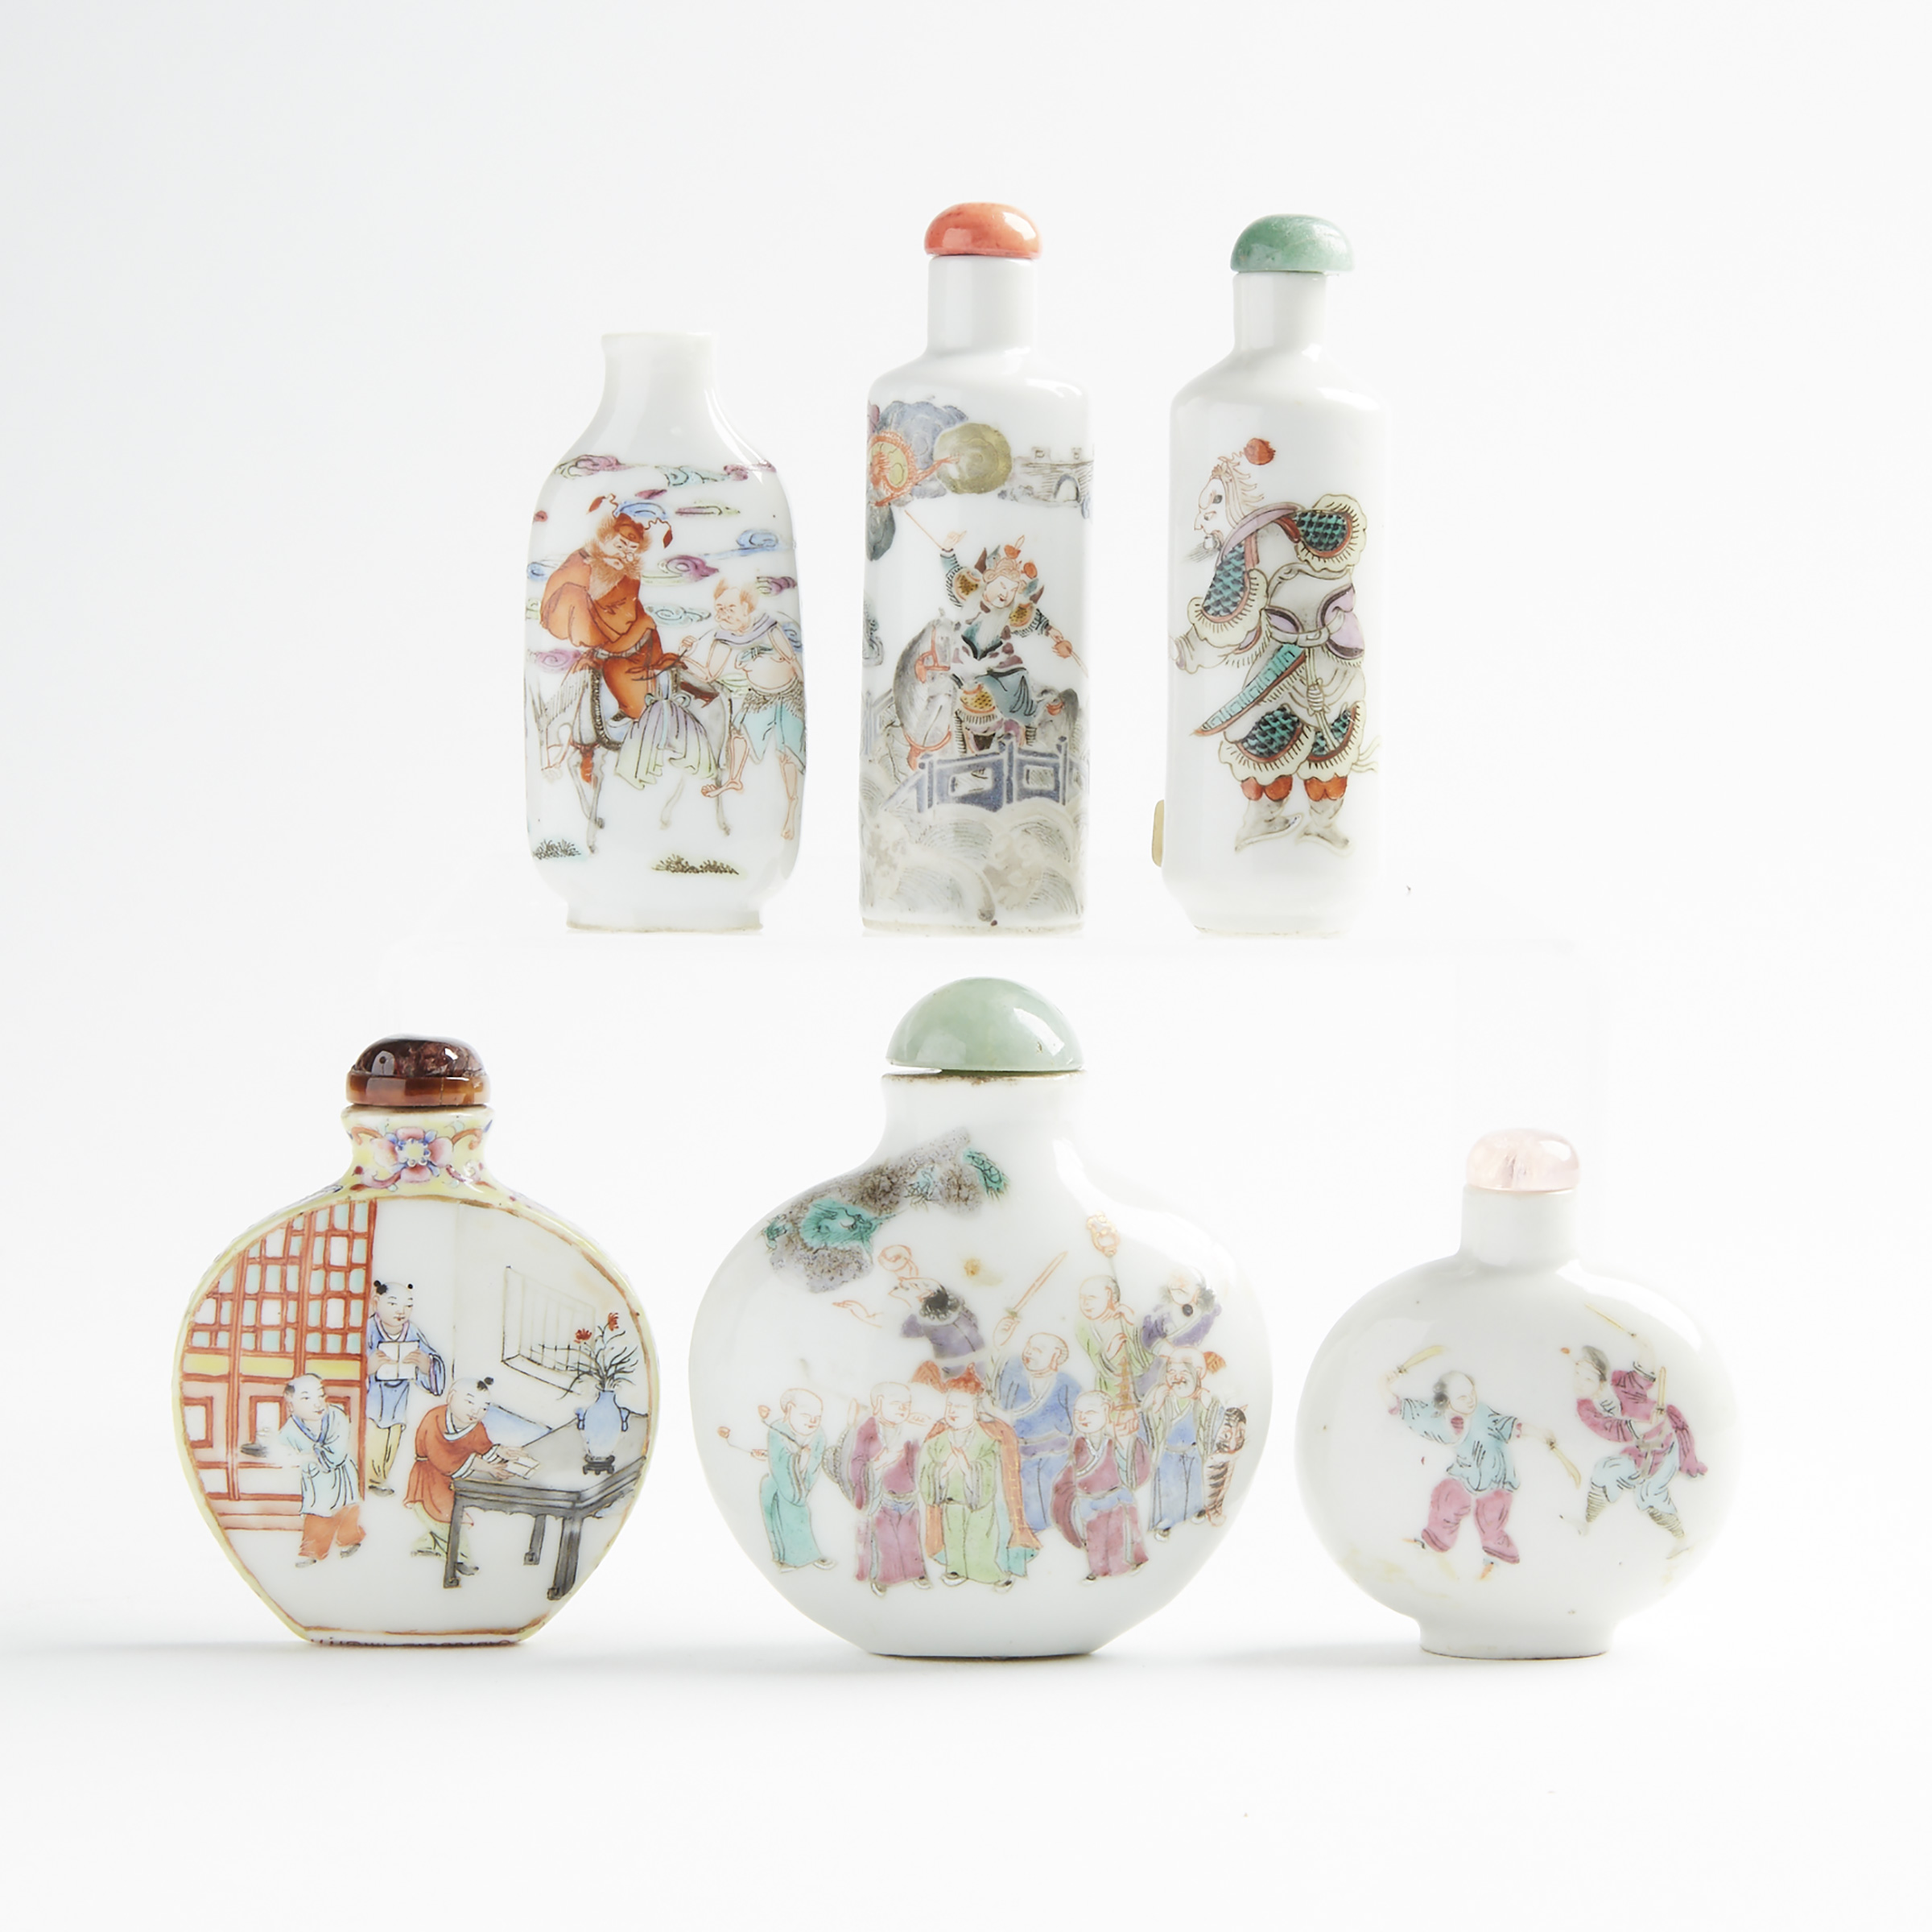 A Group of Six Enameled Porcelain Snuff Bottles, 19th/20th Century